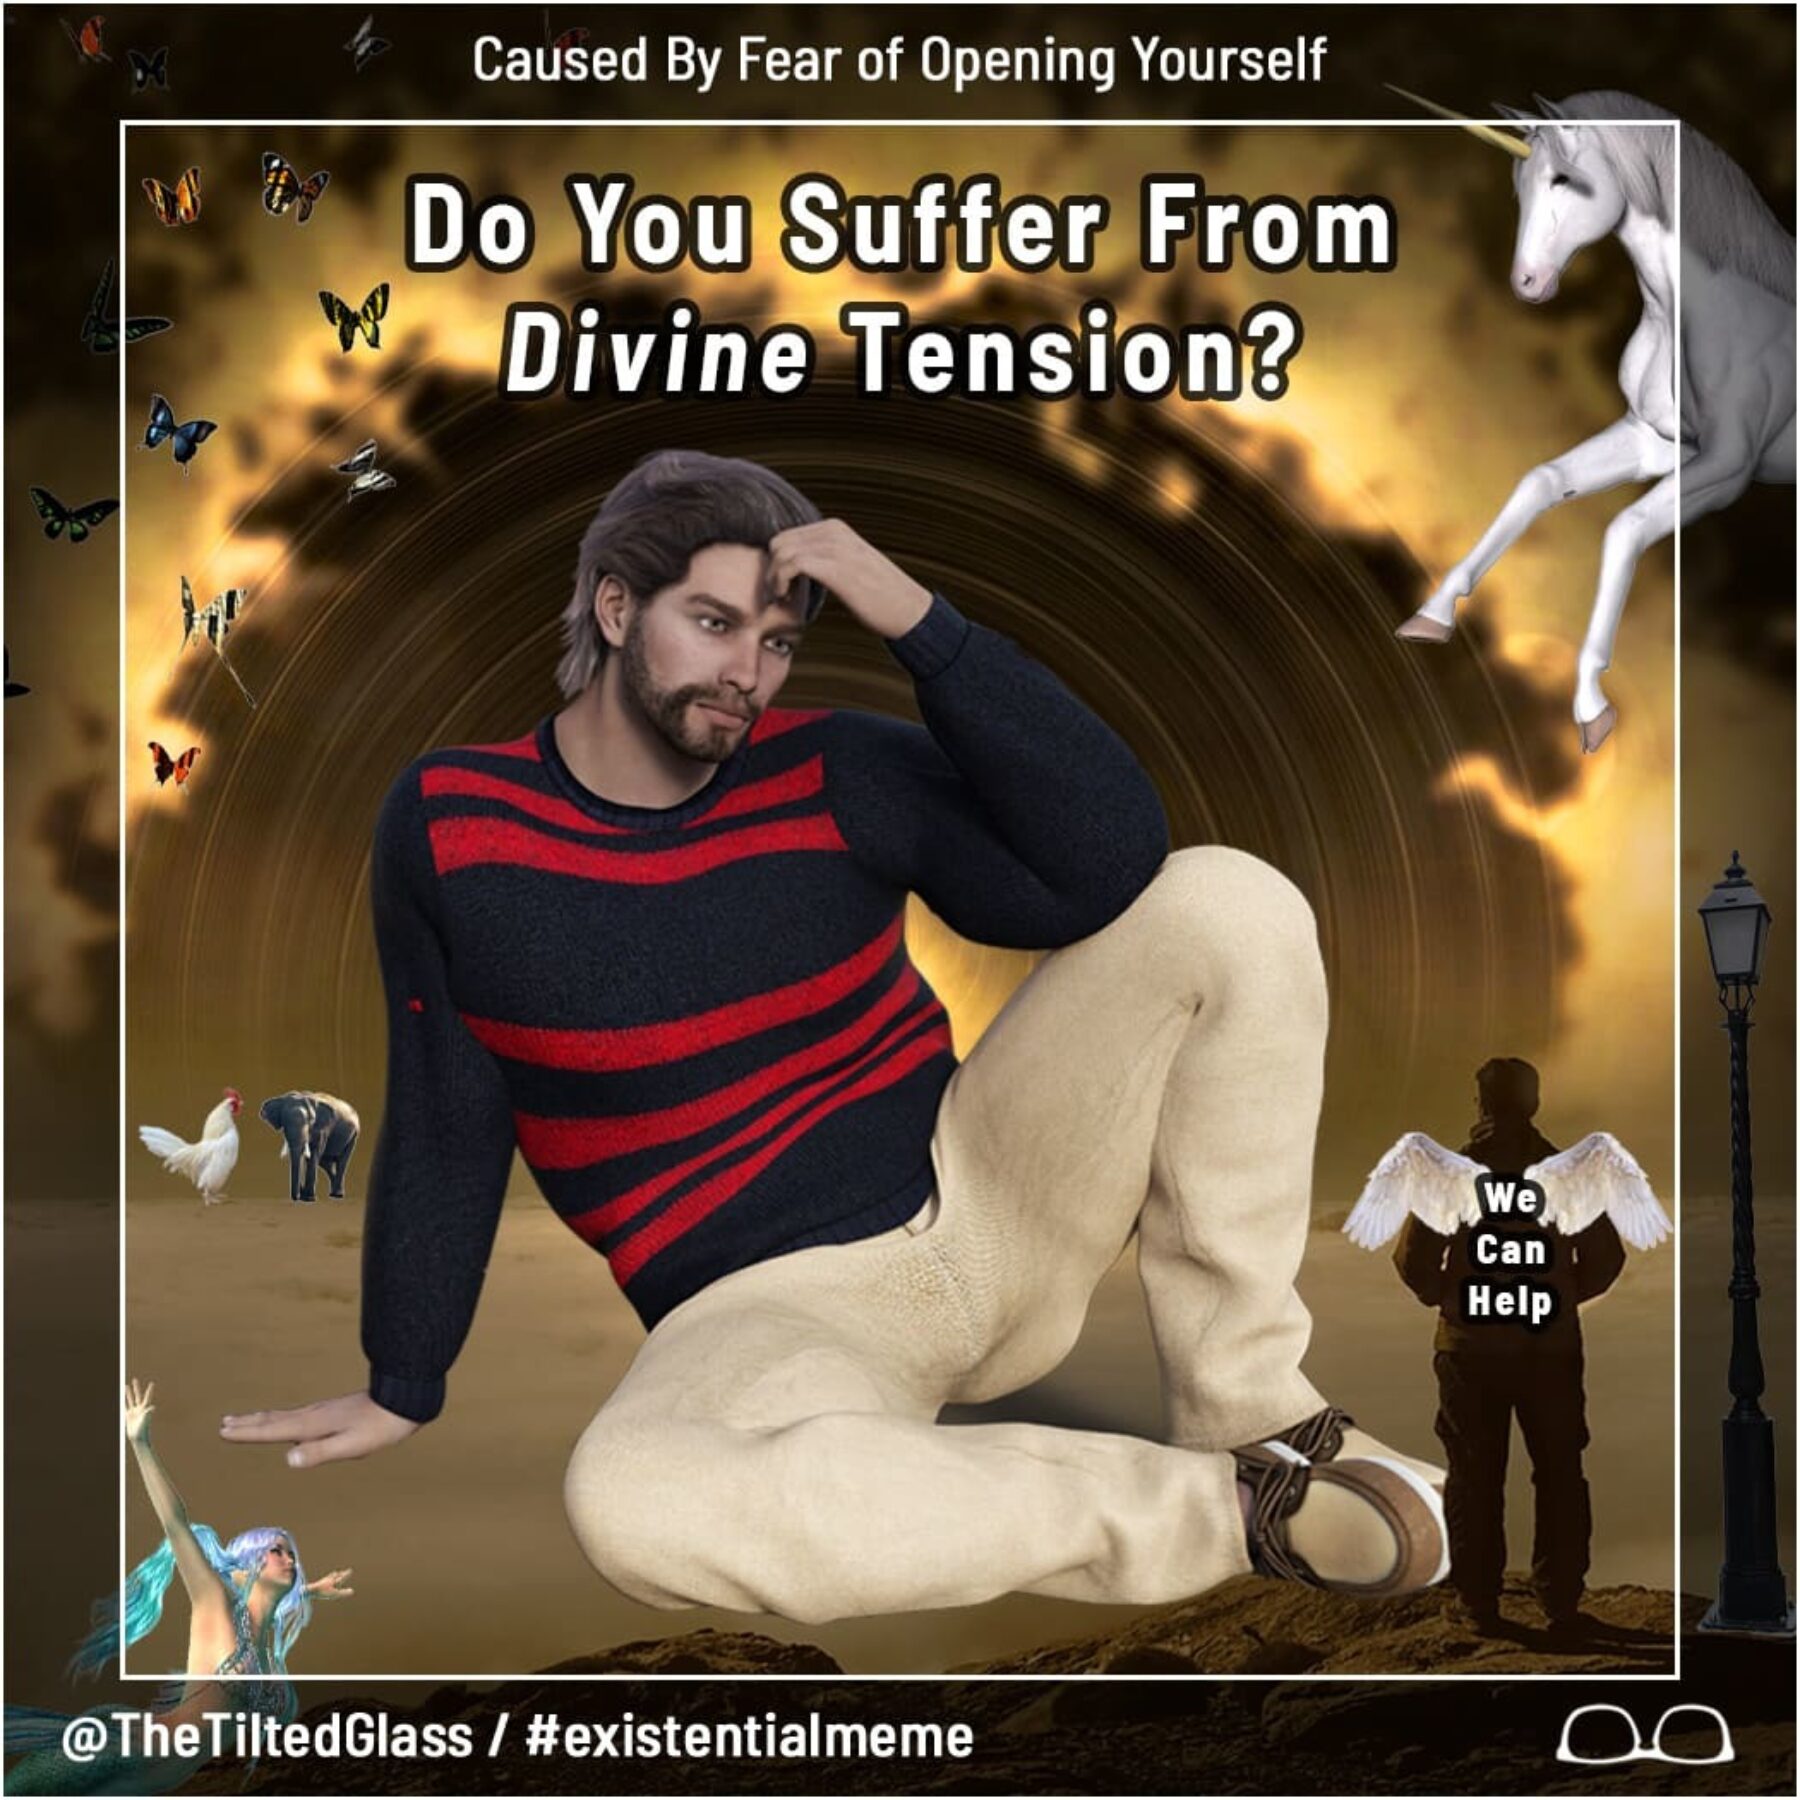 Do You Suffer From Divine Tension?